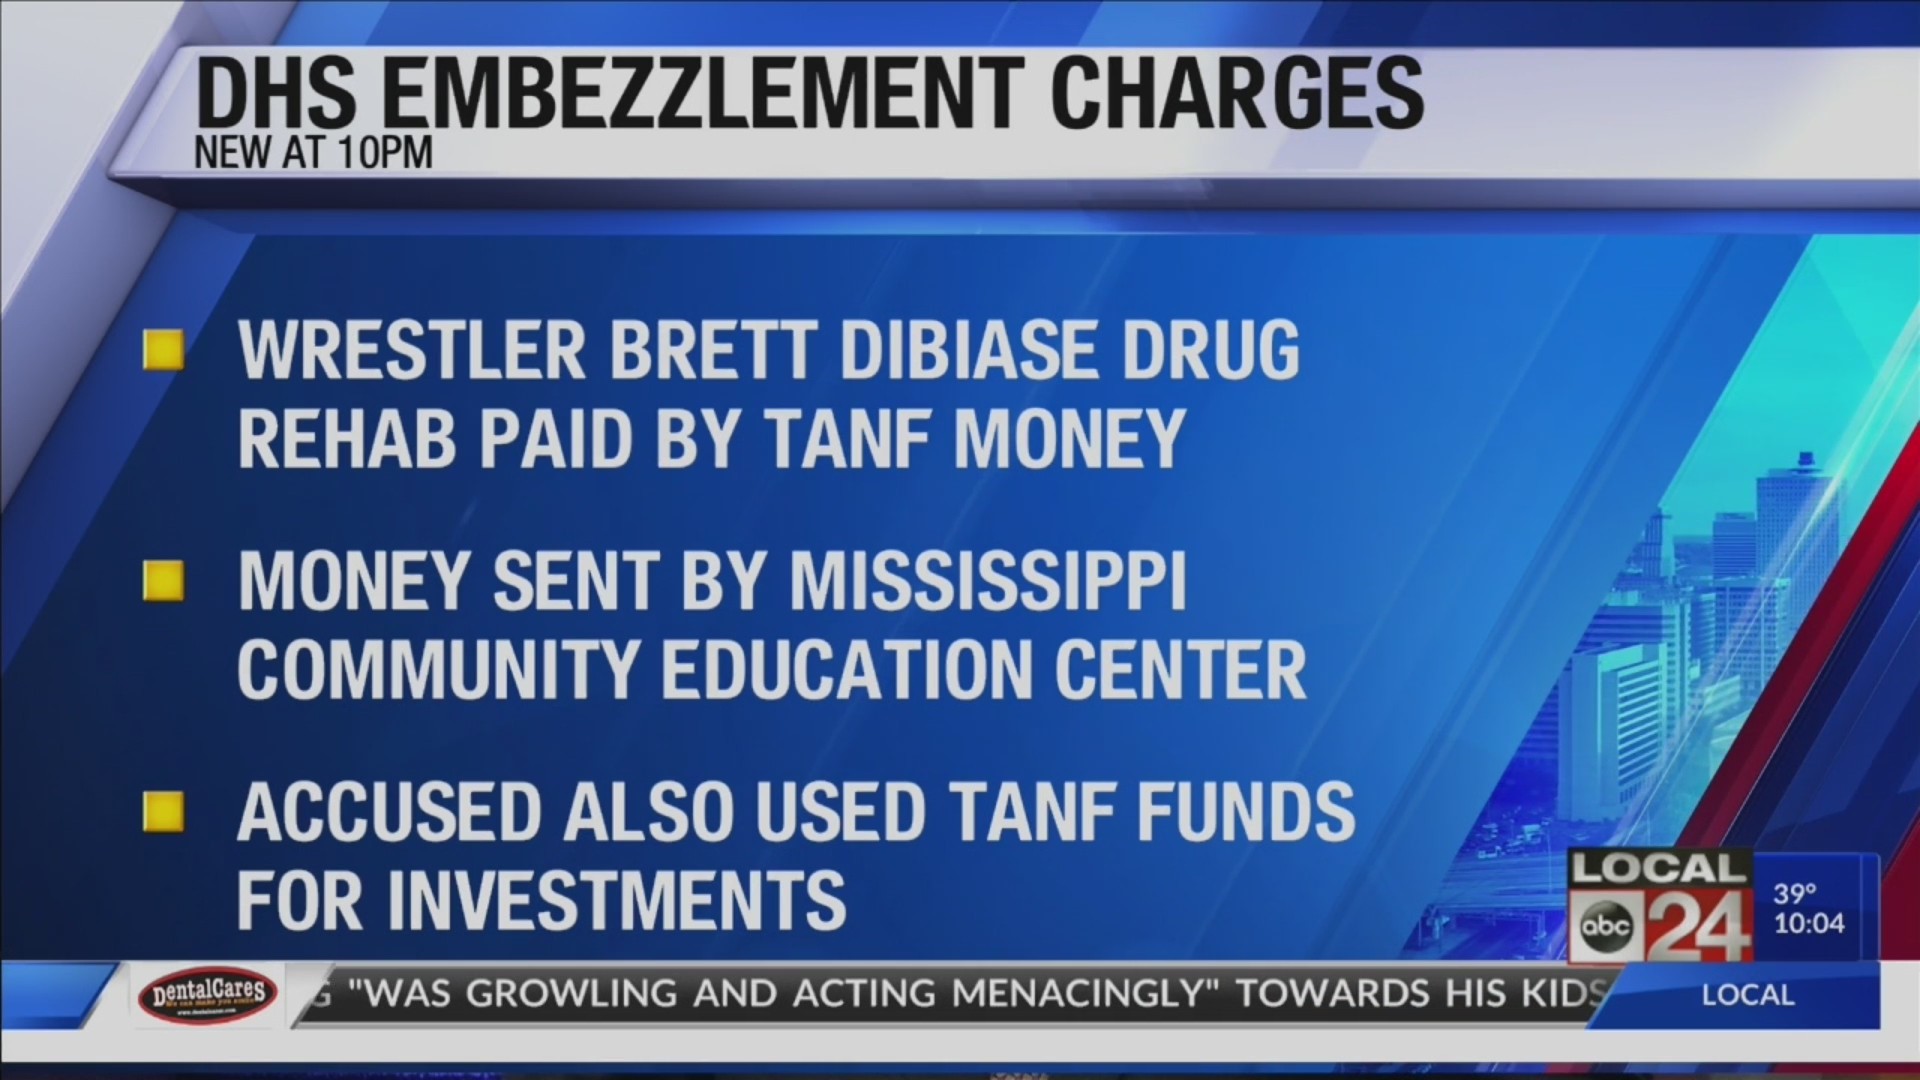 Former MS DHS Director & several others indicted in multimillion-dollar embezzlement scheme